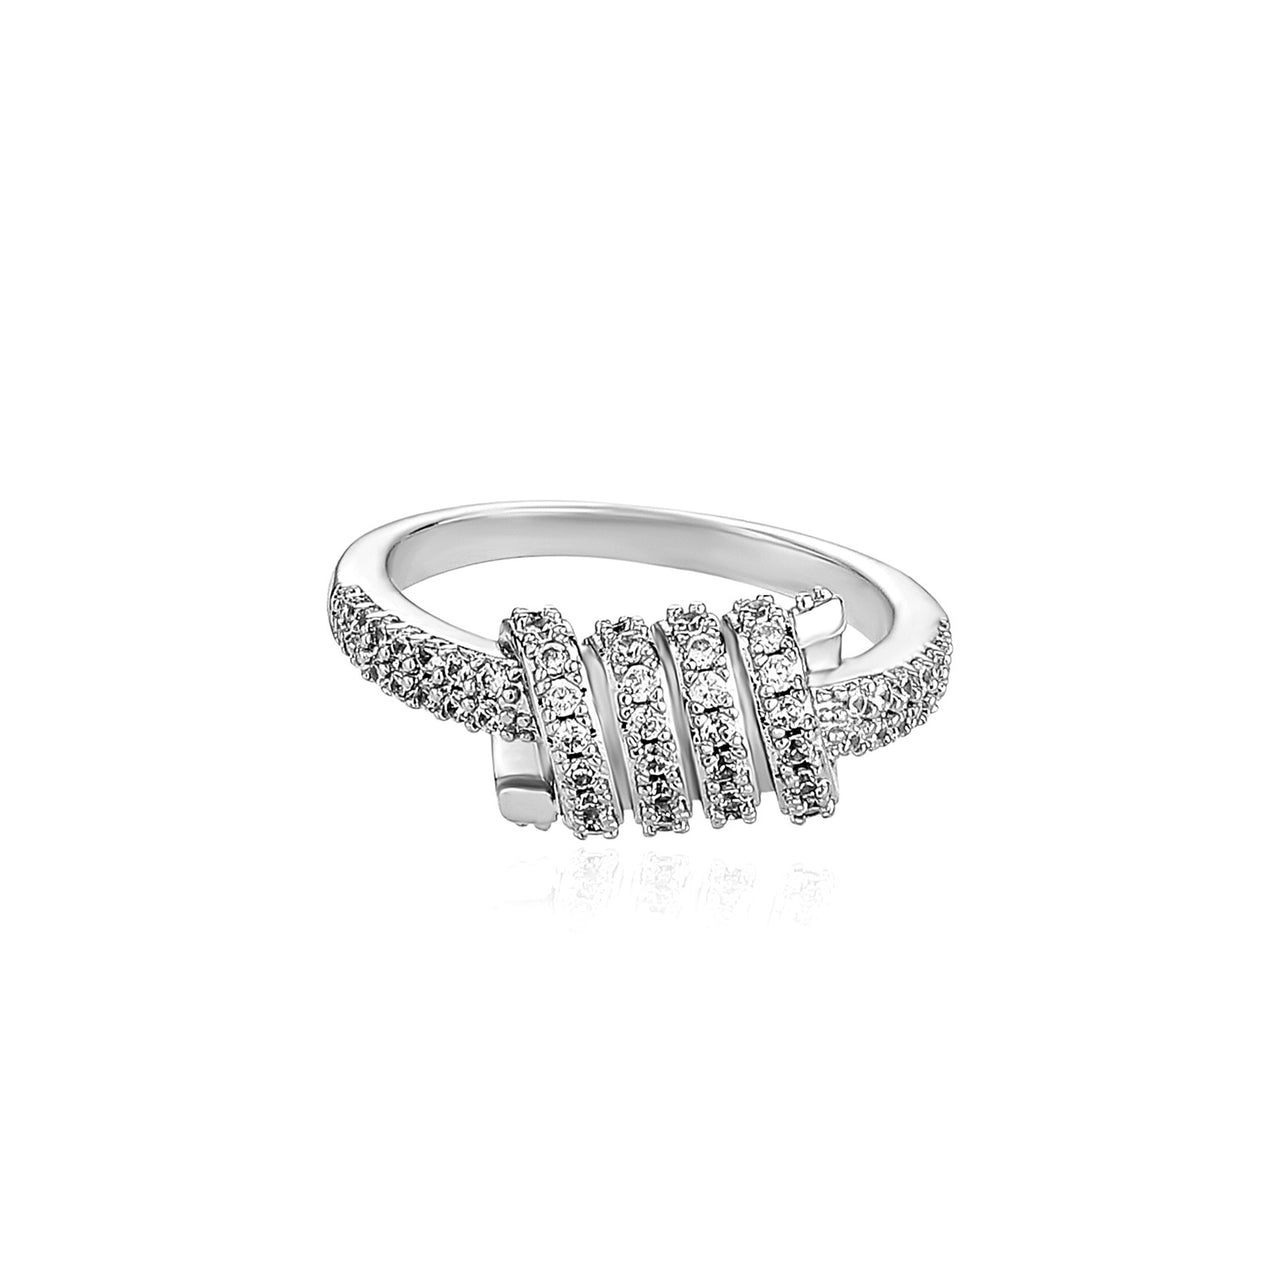 Stephen Webster Diamond and White Gold Barbed Wire Ring in White | Cowgirl  jewelry, Cheap diamond rings, Country jewelry